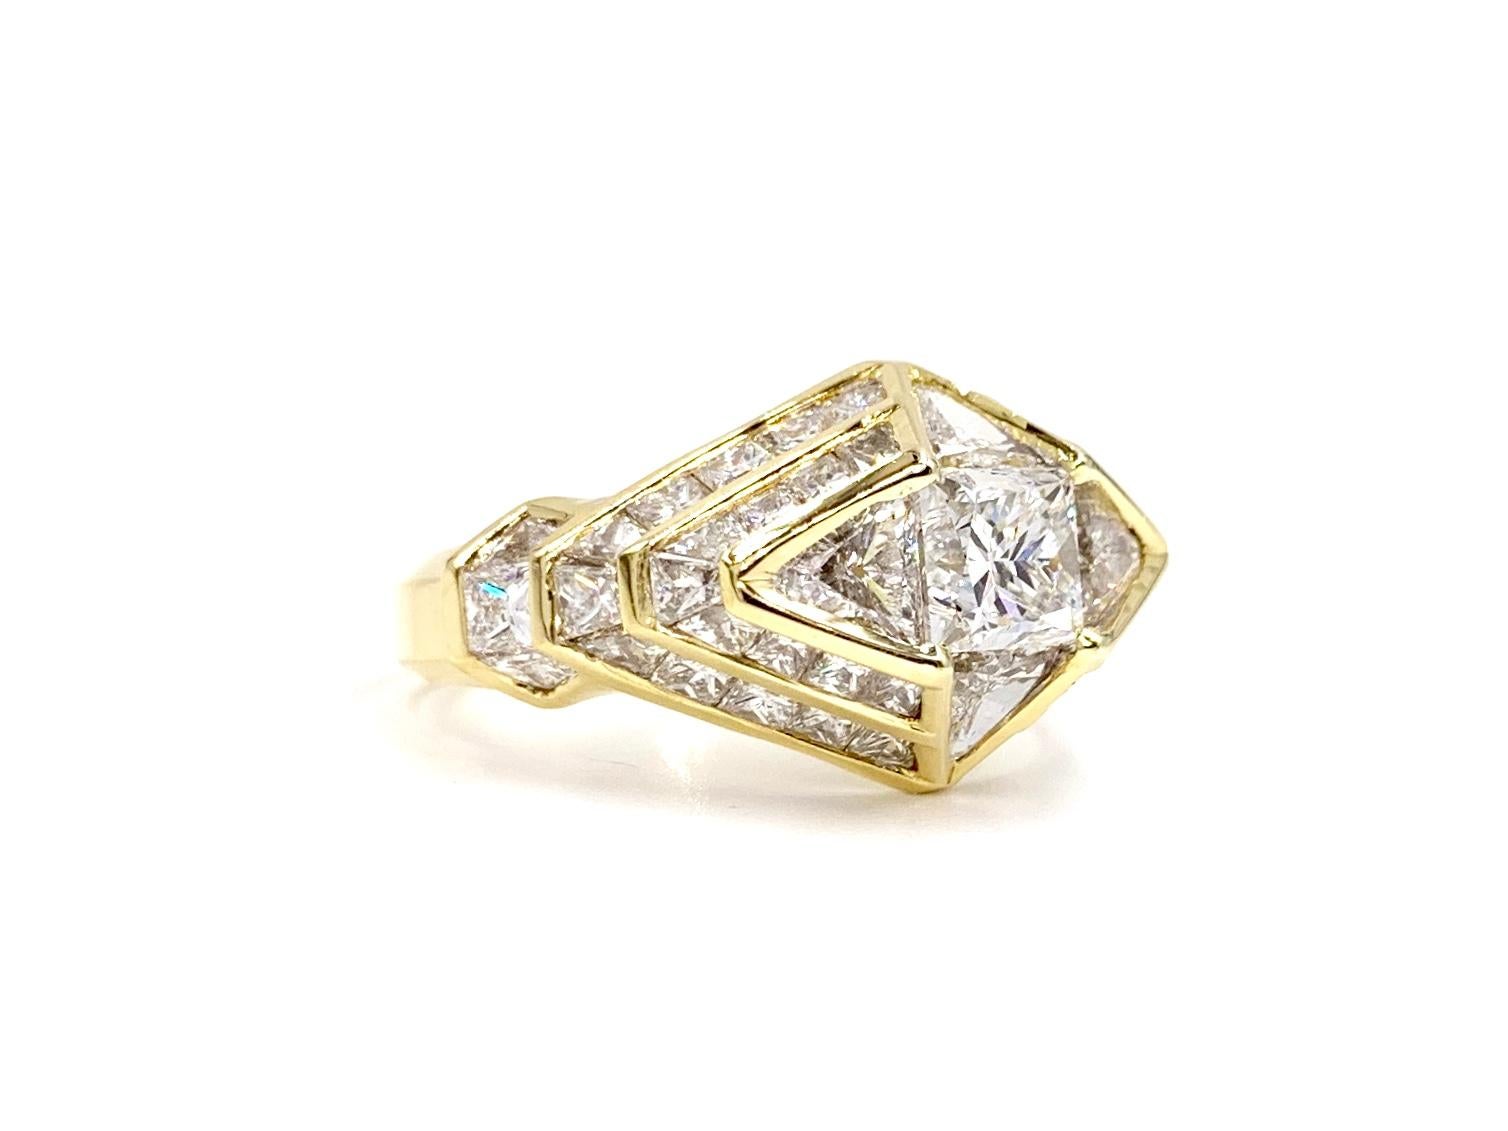 Beautifully refined 18 karat yellow gold Art Deco inspired geometric diamond ring featuring a 1.01 carat princess cut center surrounded by 4.46 carats of trillion and princess cut diamonds. Diamond quality is approximately G-H color, VS2-SI1